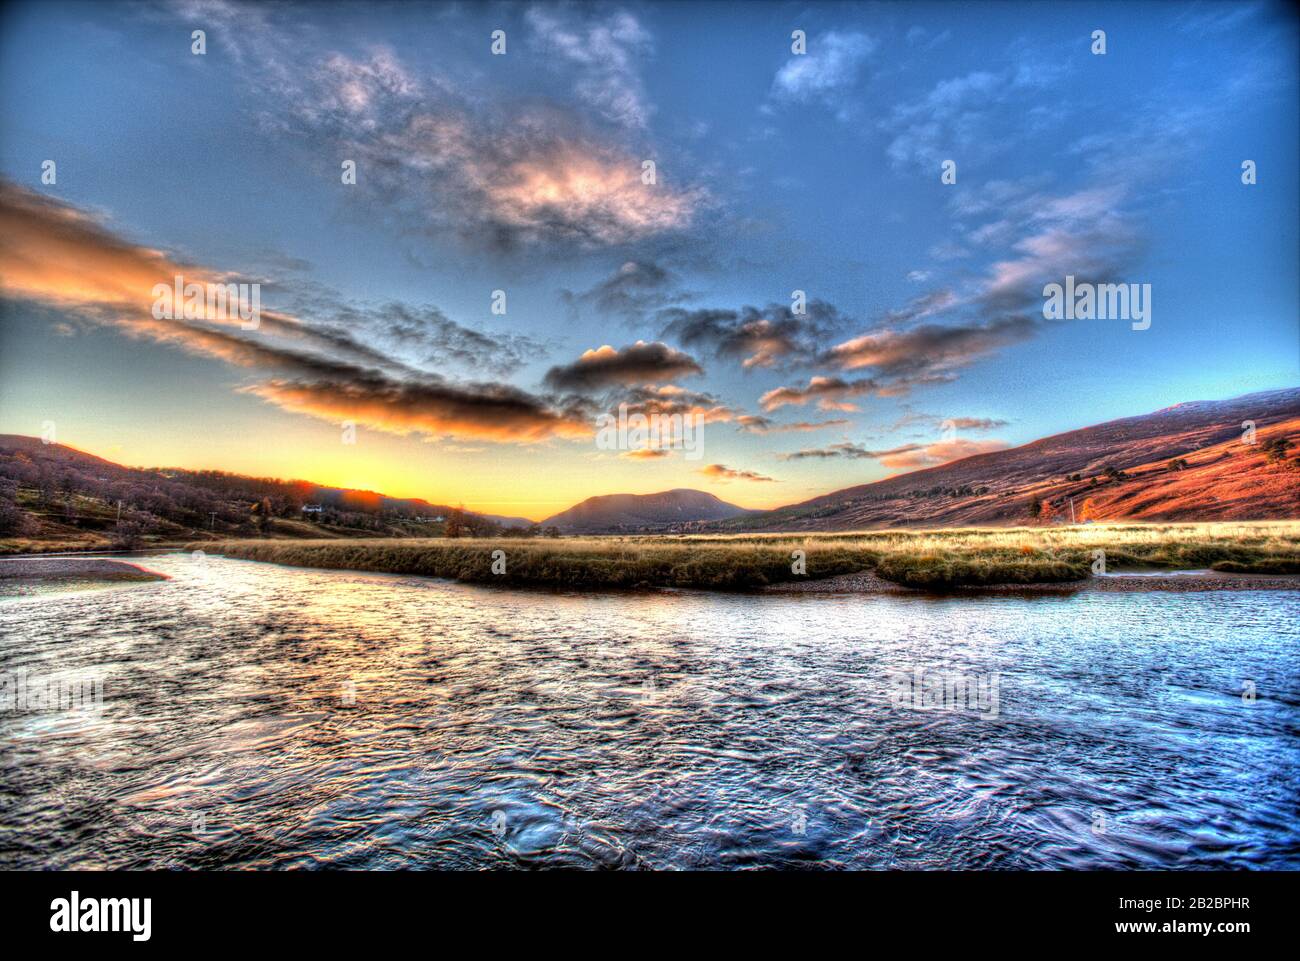 Area of Braemar, Scotland. Artistic sunset view over the River Dee, on the outskirts of Breamar. Stock Photo